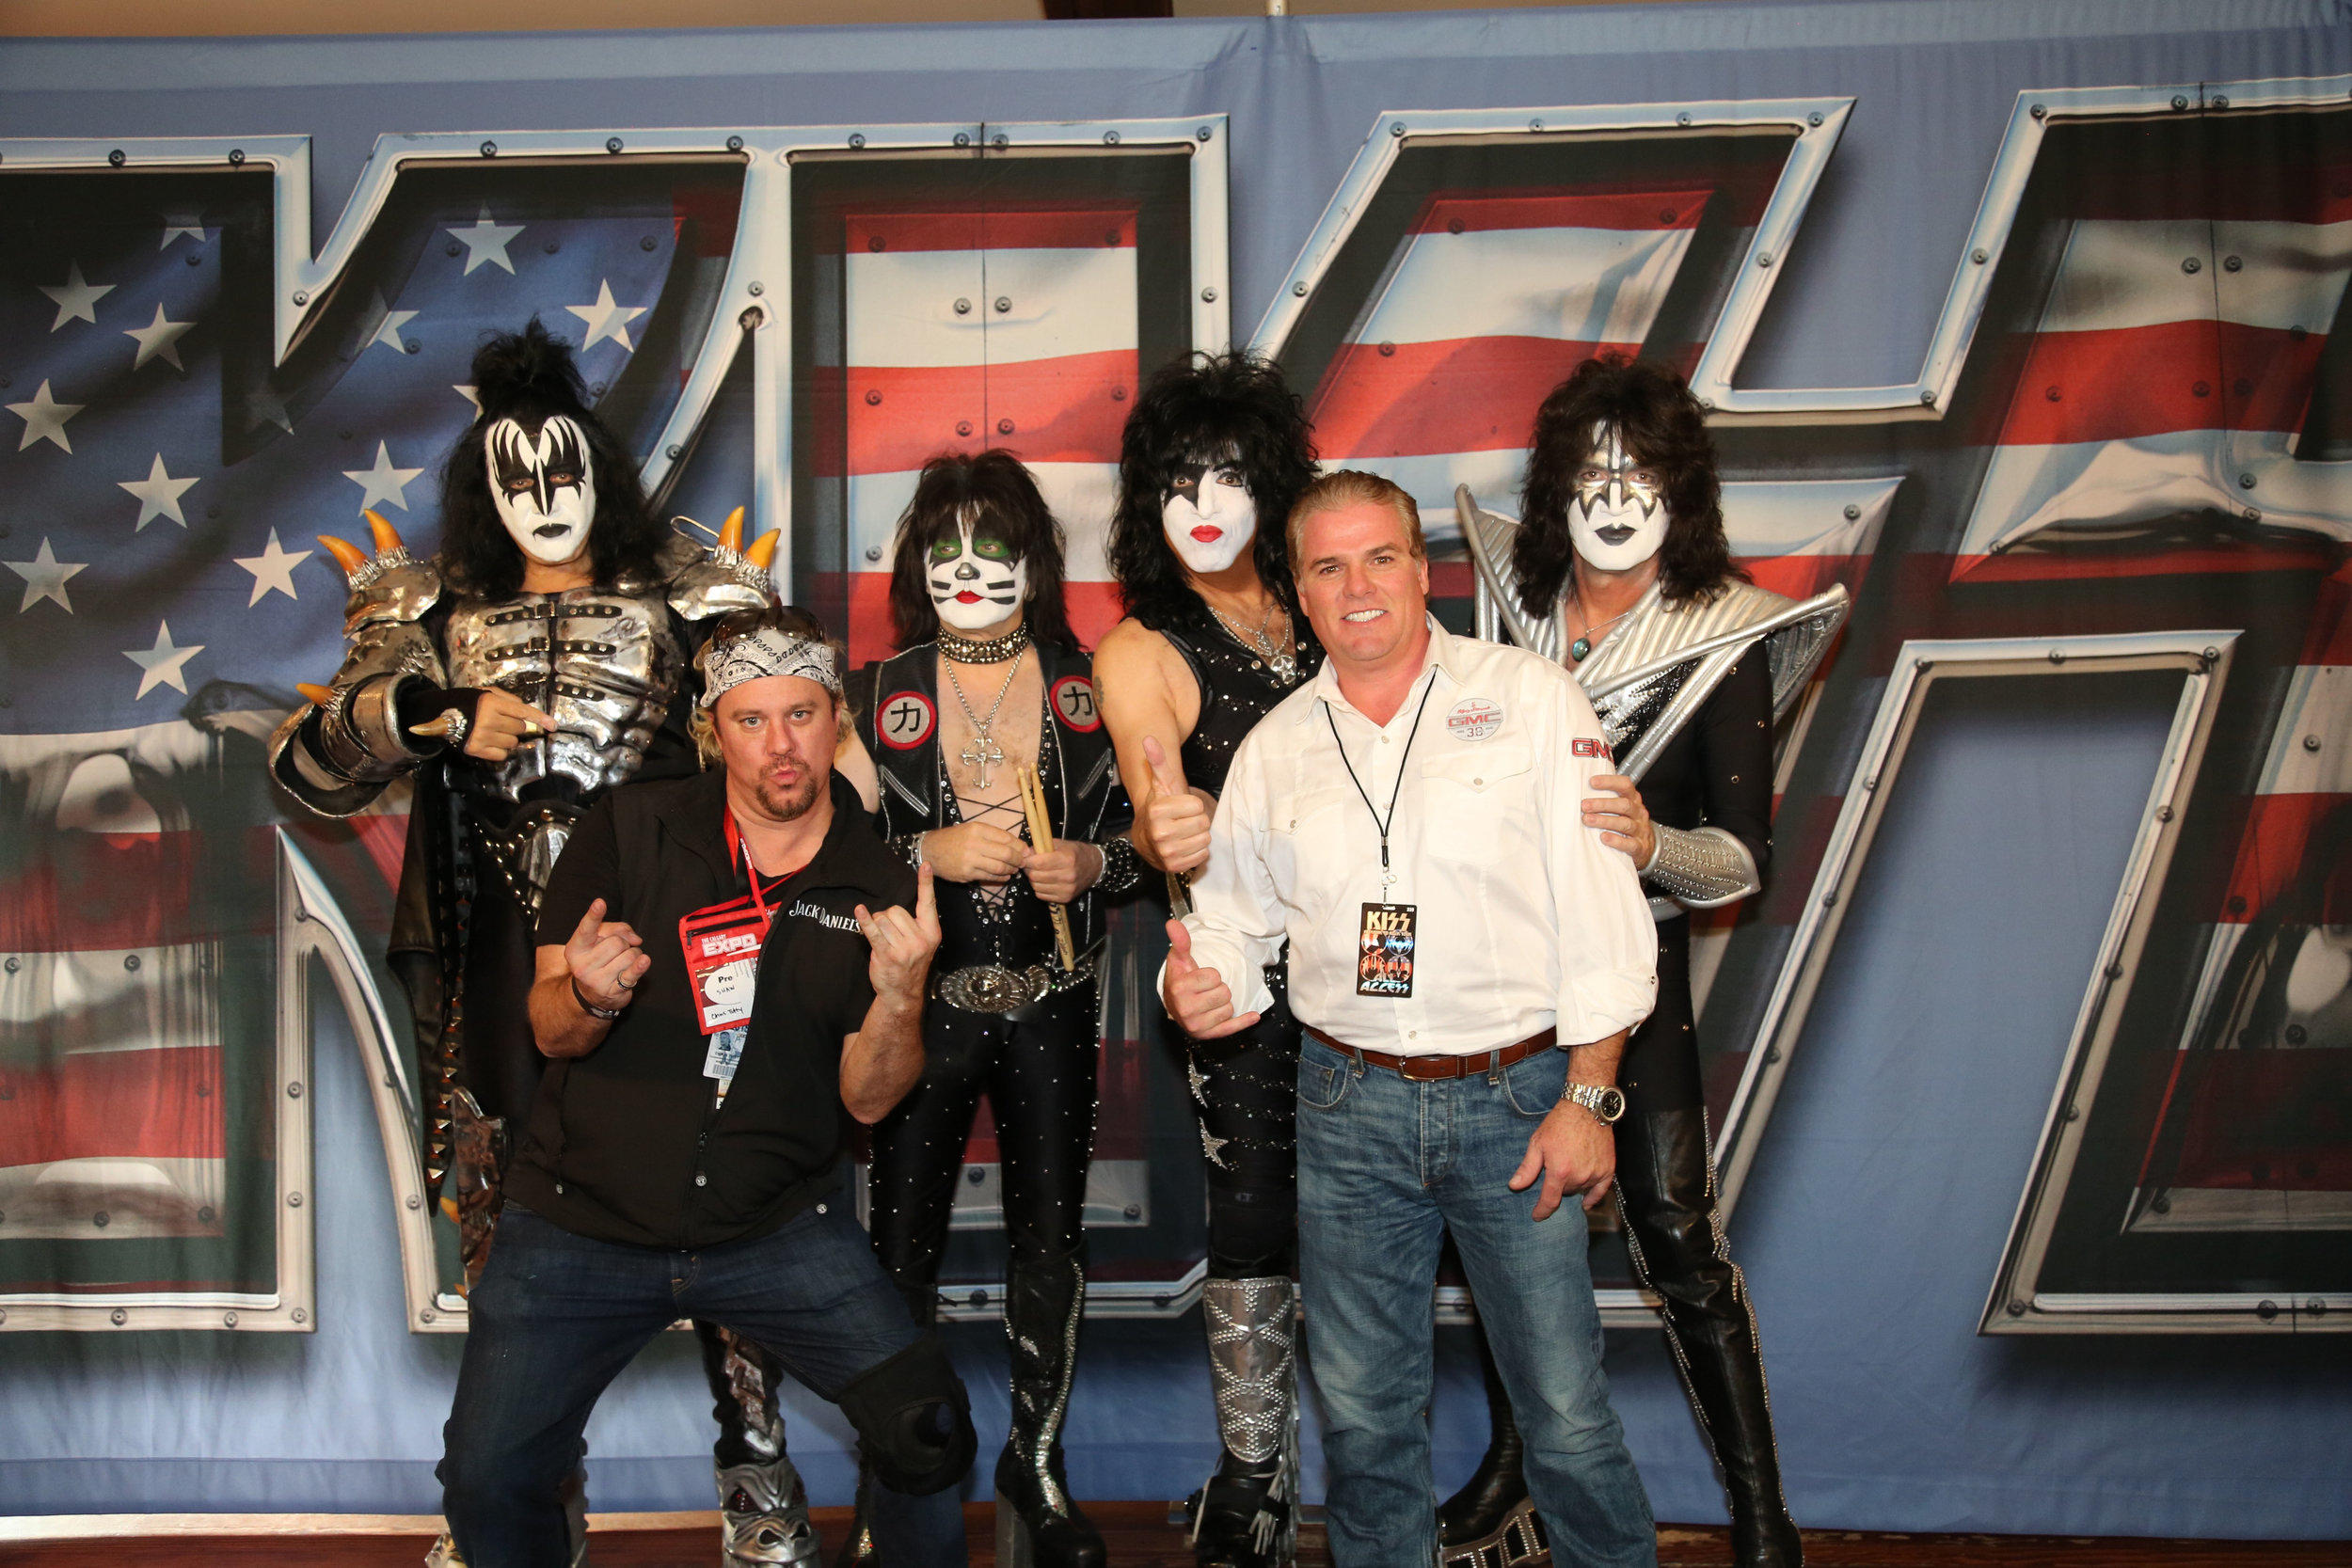 Chris Tutty and KISS